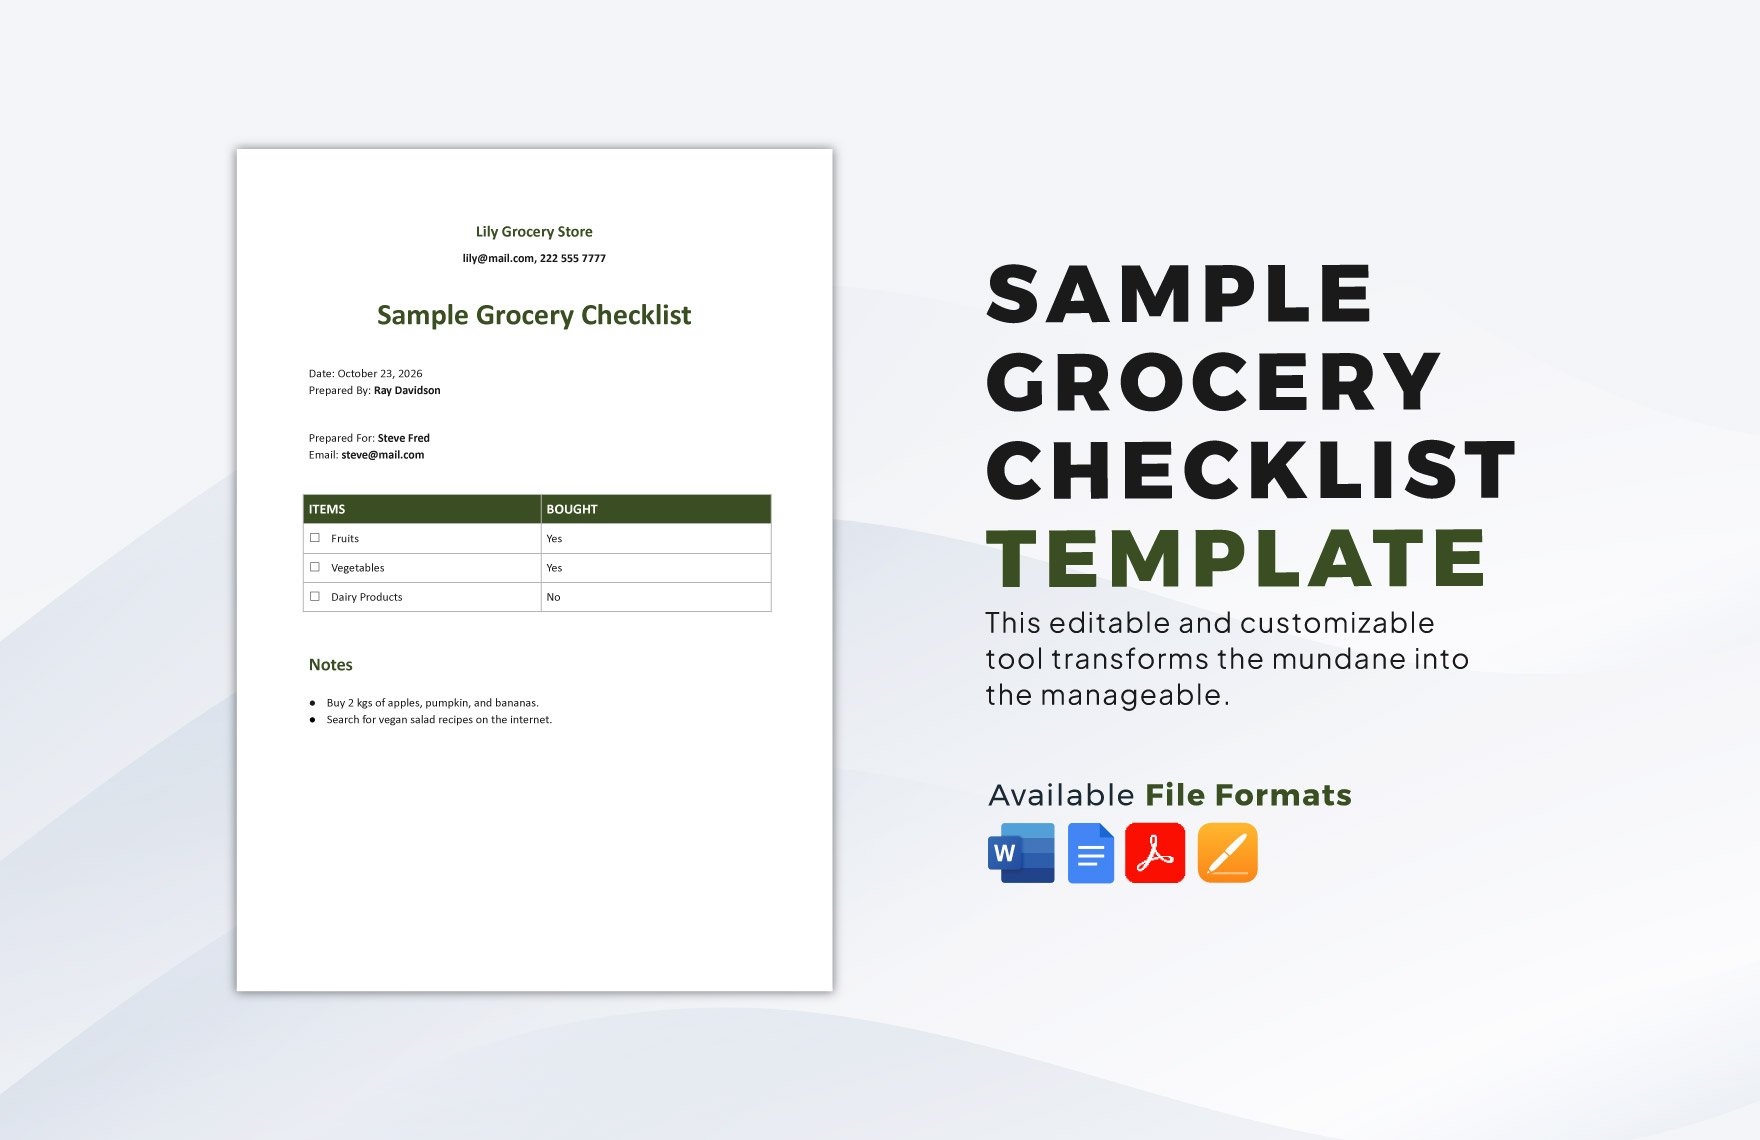 Sample Grocery Checklist Template in Word, Google Docs, PDF, Apple Pages